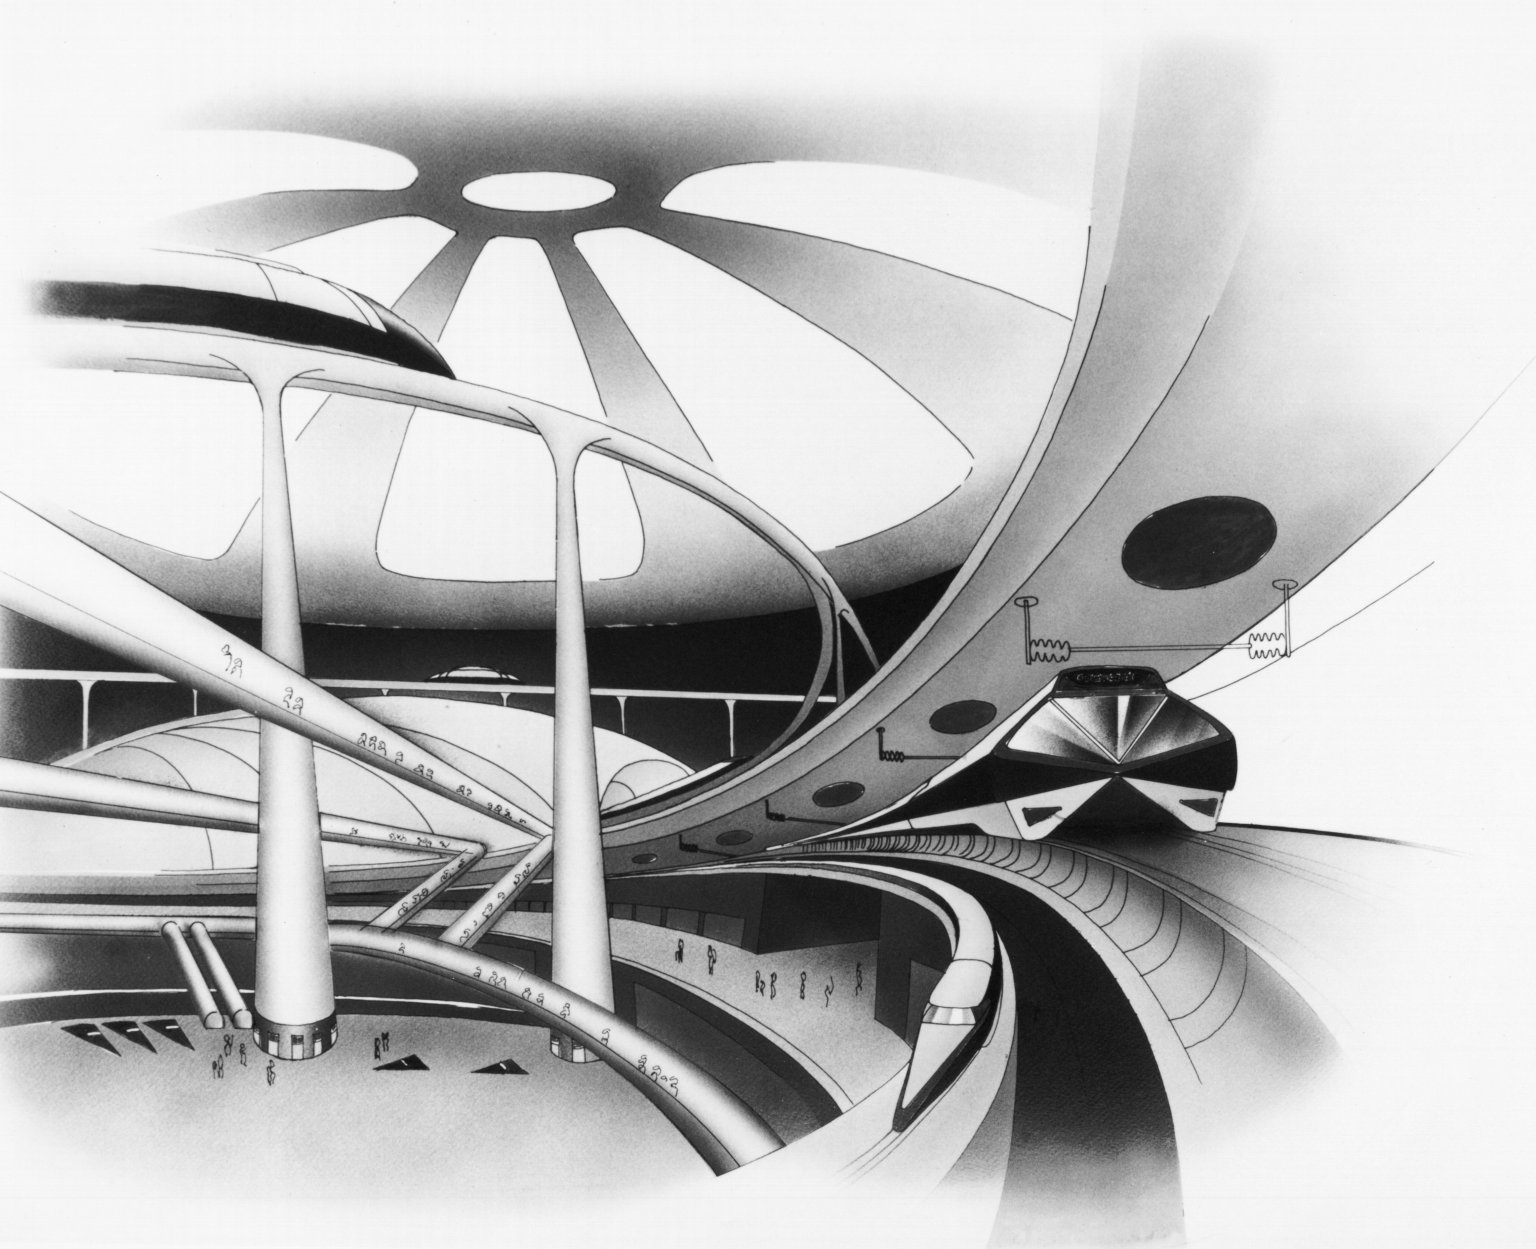 Concept drawing of futuristic station or airport with railway links and passenger 'tubes'.